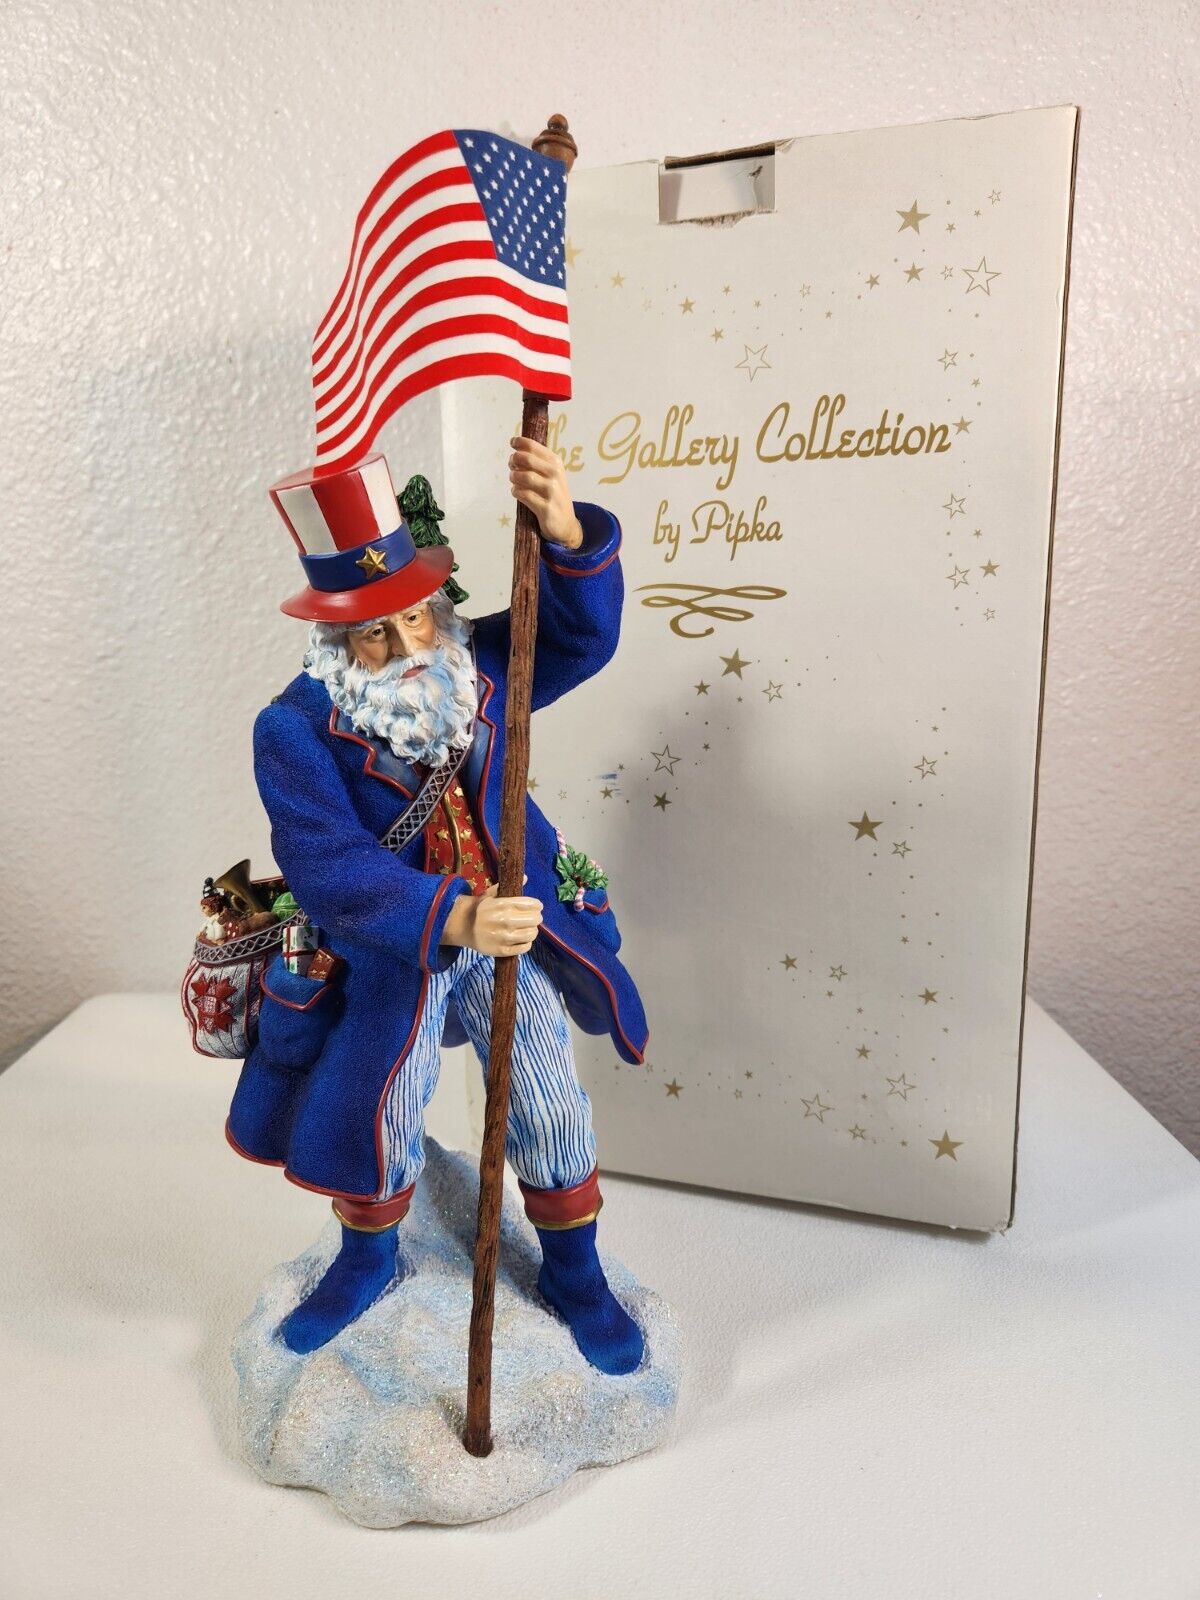 Patriotic Santa Christmas Figure & Flag The Gallery Collection by Pipka 2001